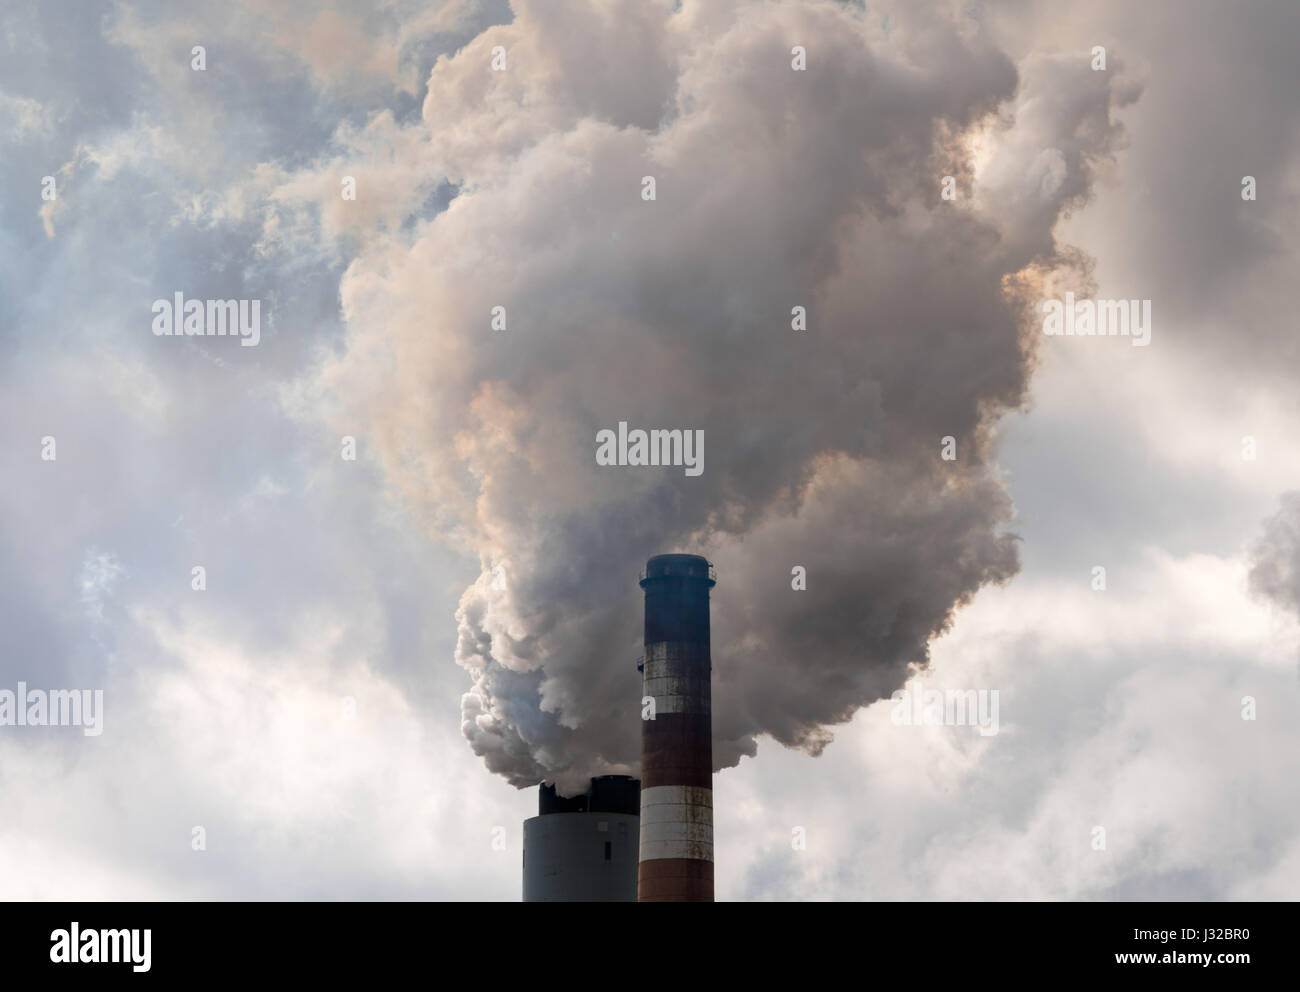 Smoke and air pollution from the chimney of an American industiral coal fired power station, USA Stock Photo